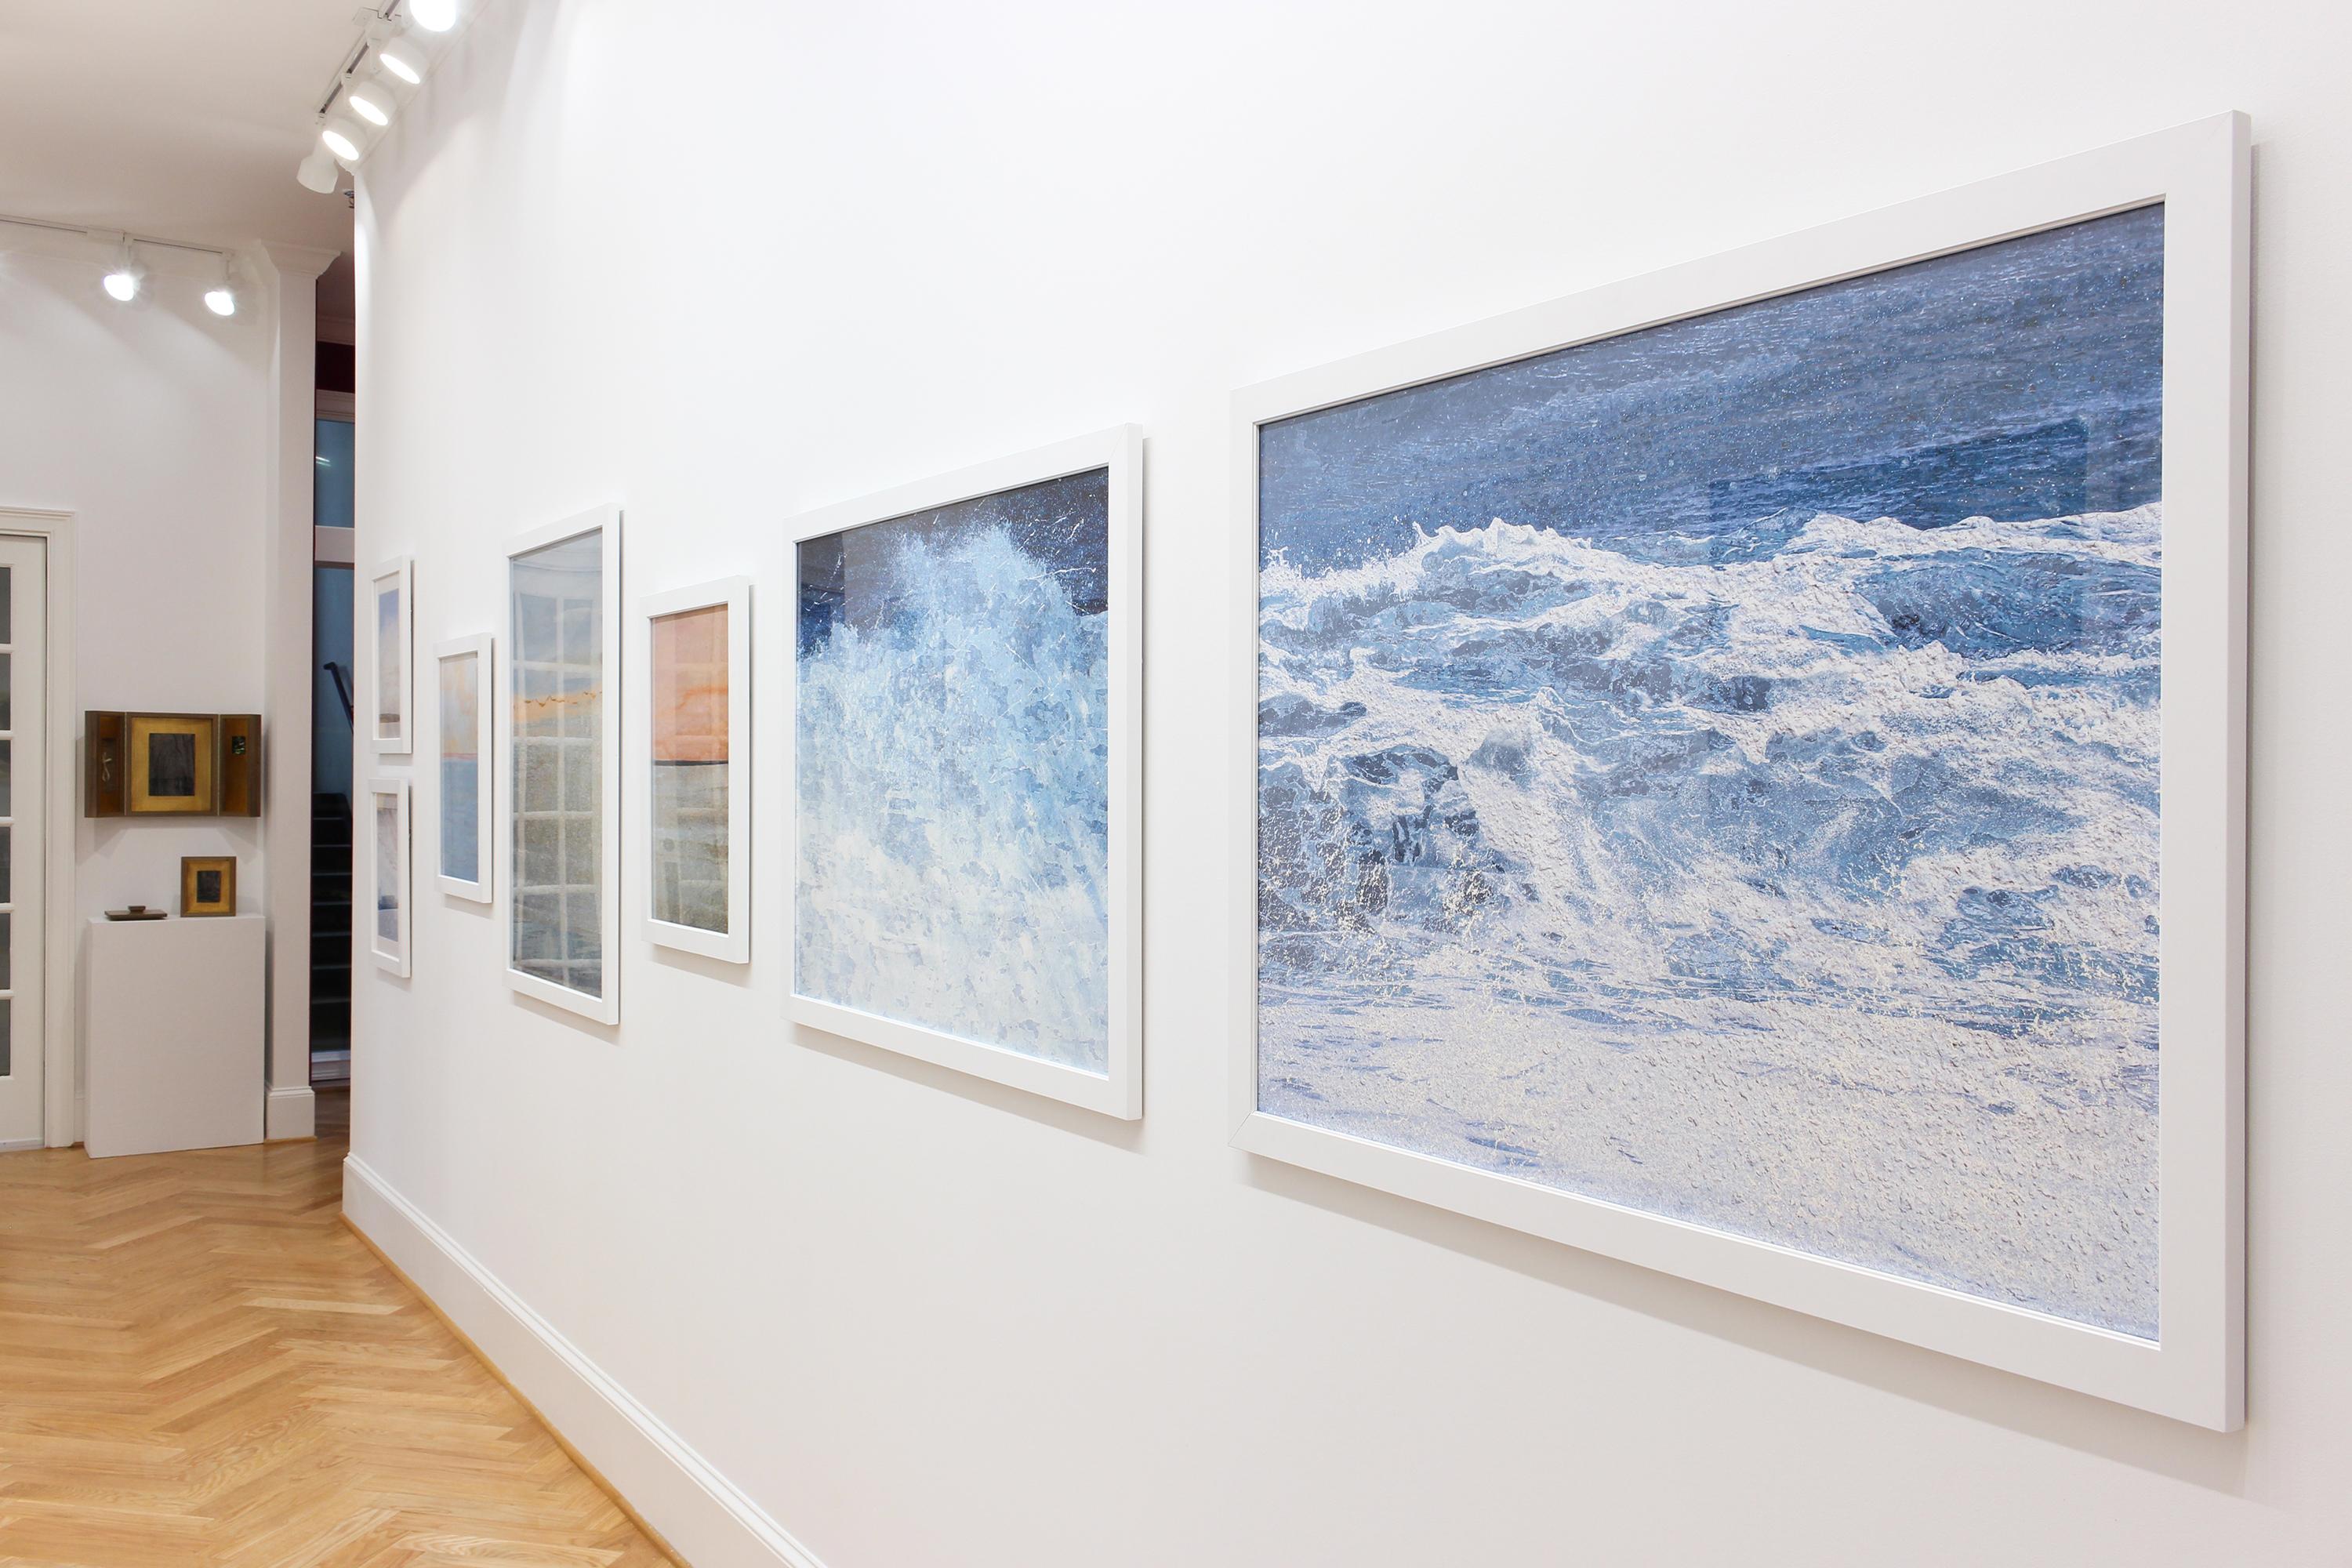 This textured composite landscape, beachscape, seascape features hues of blue and white. This listing is for an unframed print.

Jennifer McKinnon Richman is an Atlanta-based photographic artist using dumpster walls to explore the impact of human